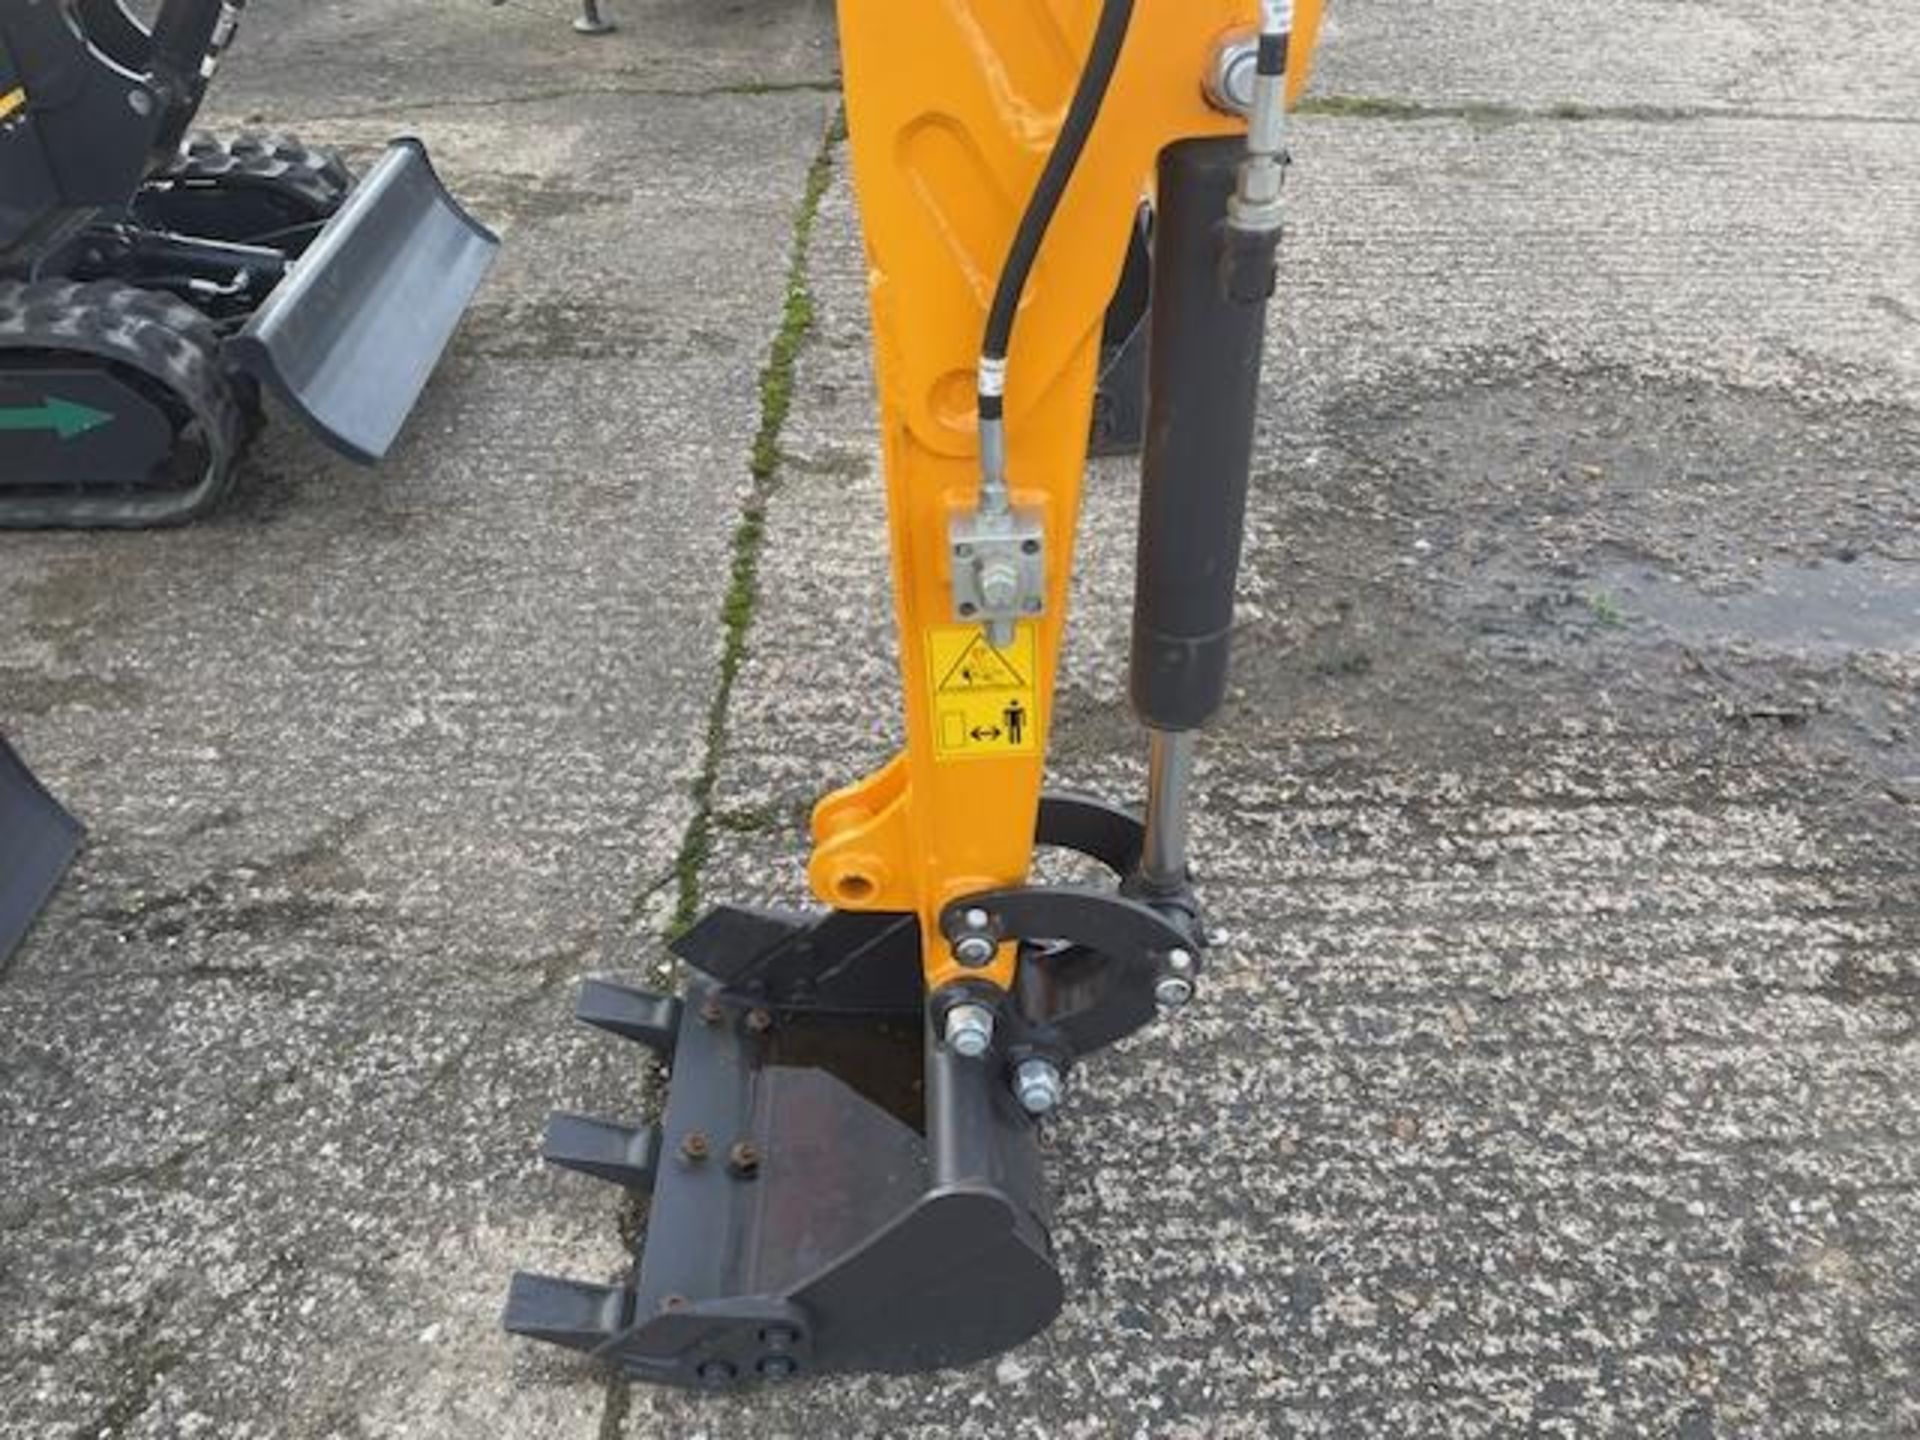 NEW UNISSUED XN10 RUBBER TRACKED MINI EXCAVATOR DIESEL ENGINE PIPED FOR HAMMER FRONT BLADE ETC - Image 2 of 8